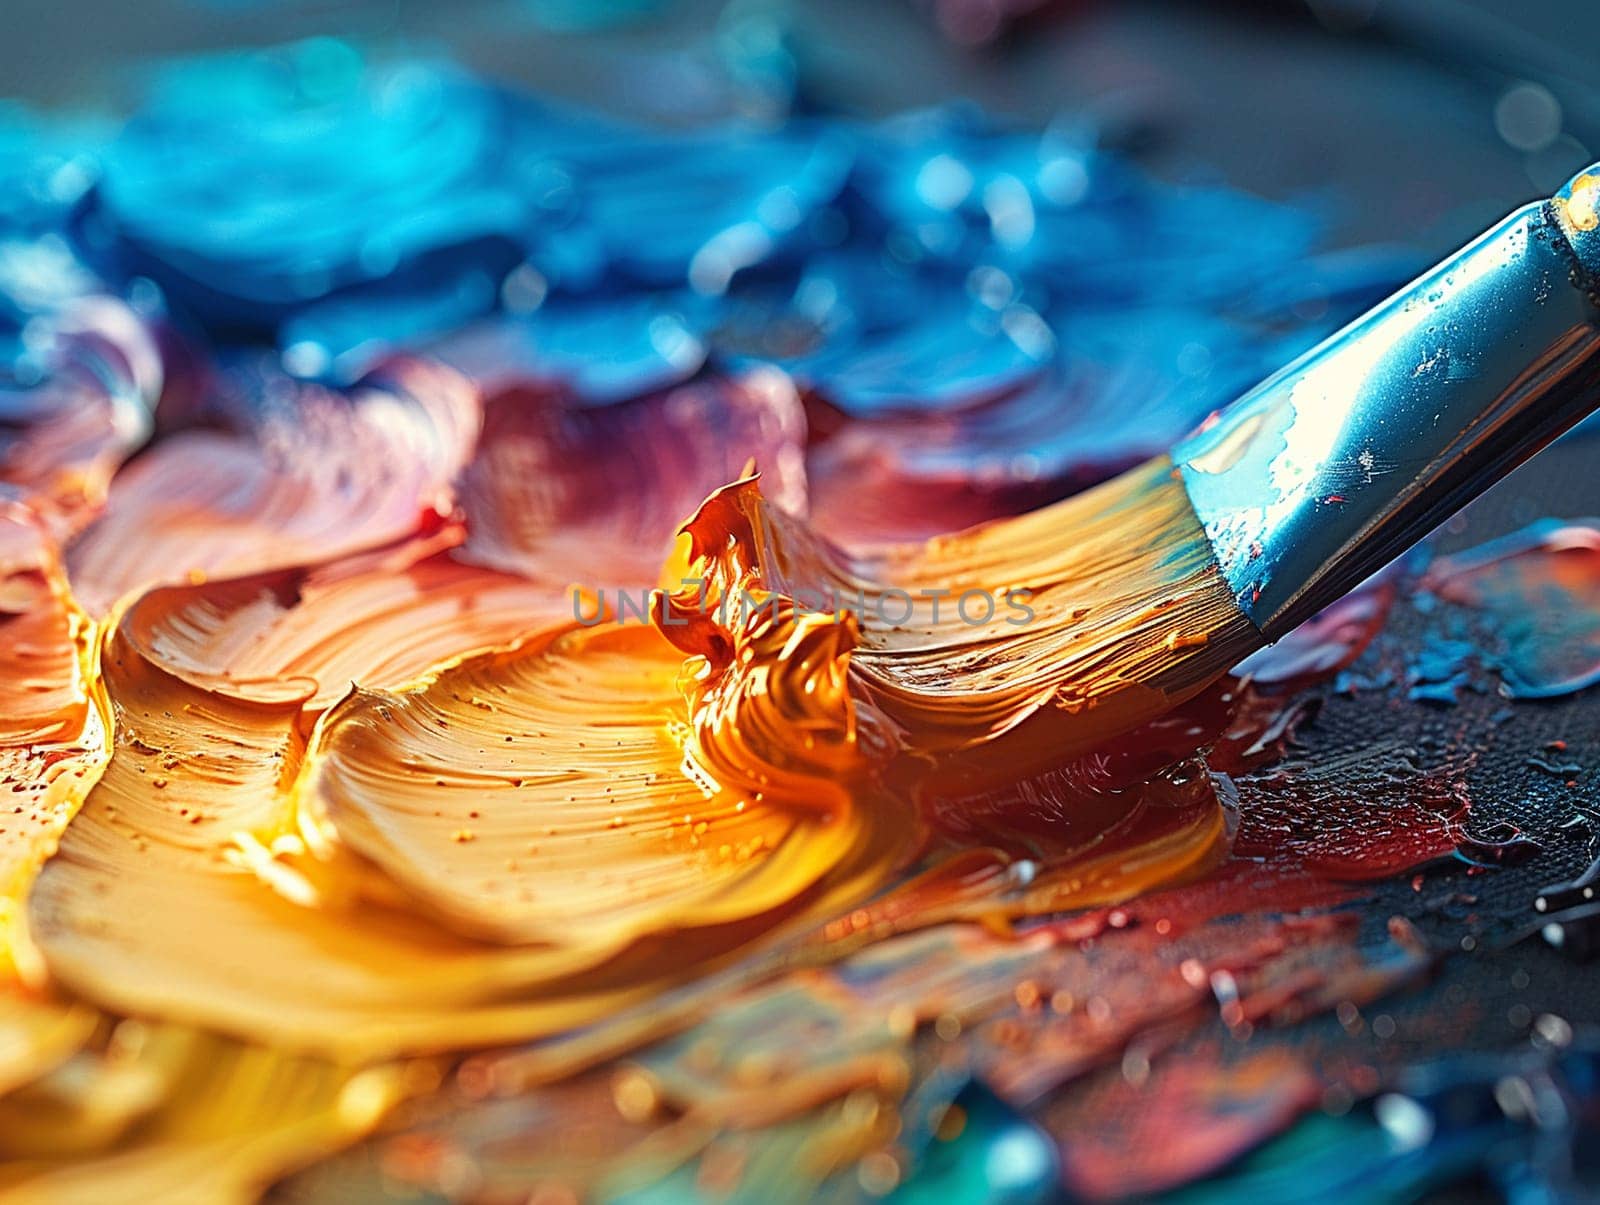 Close-up of mixing paint on an artist's palette, representing the blending of ideas and colors